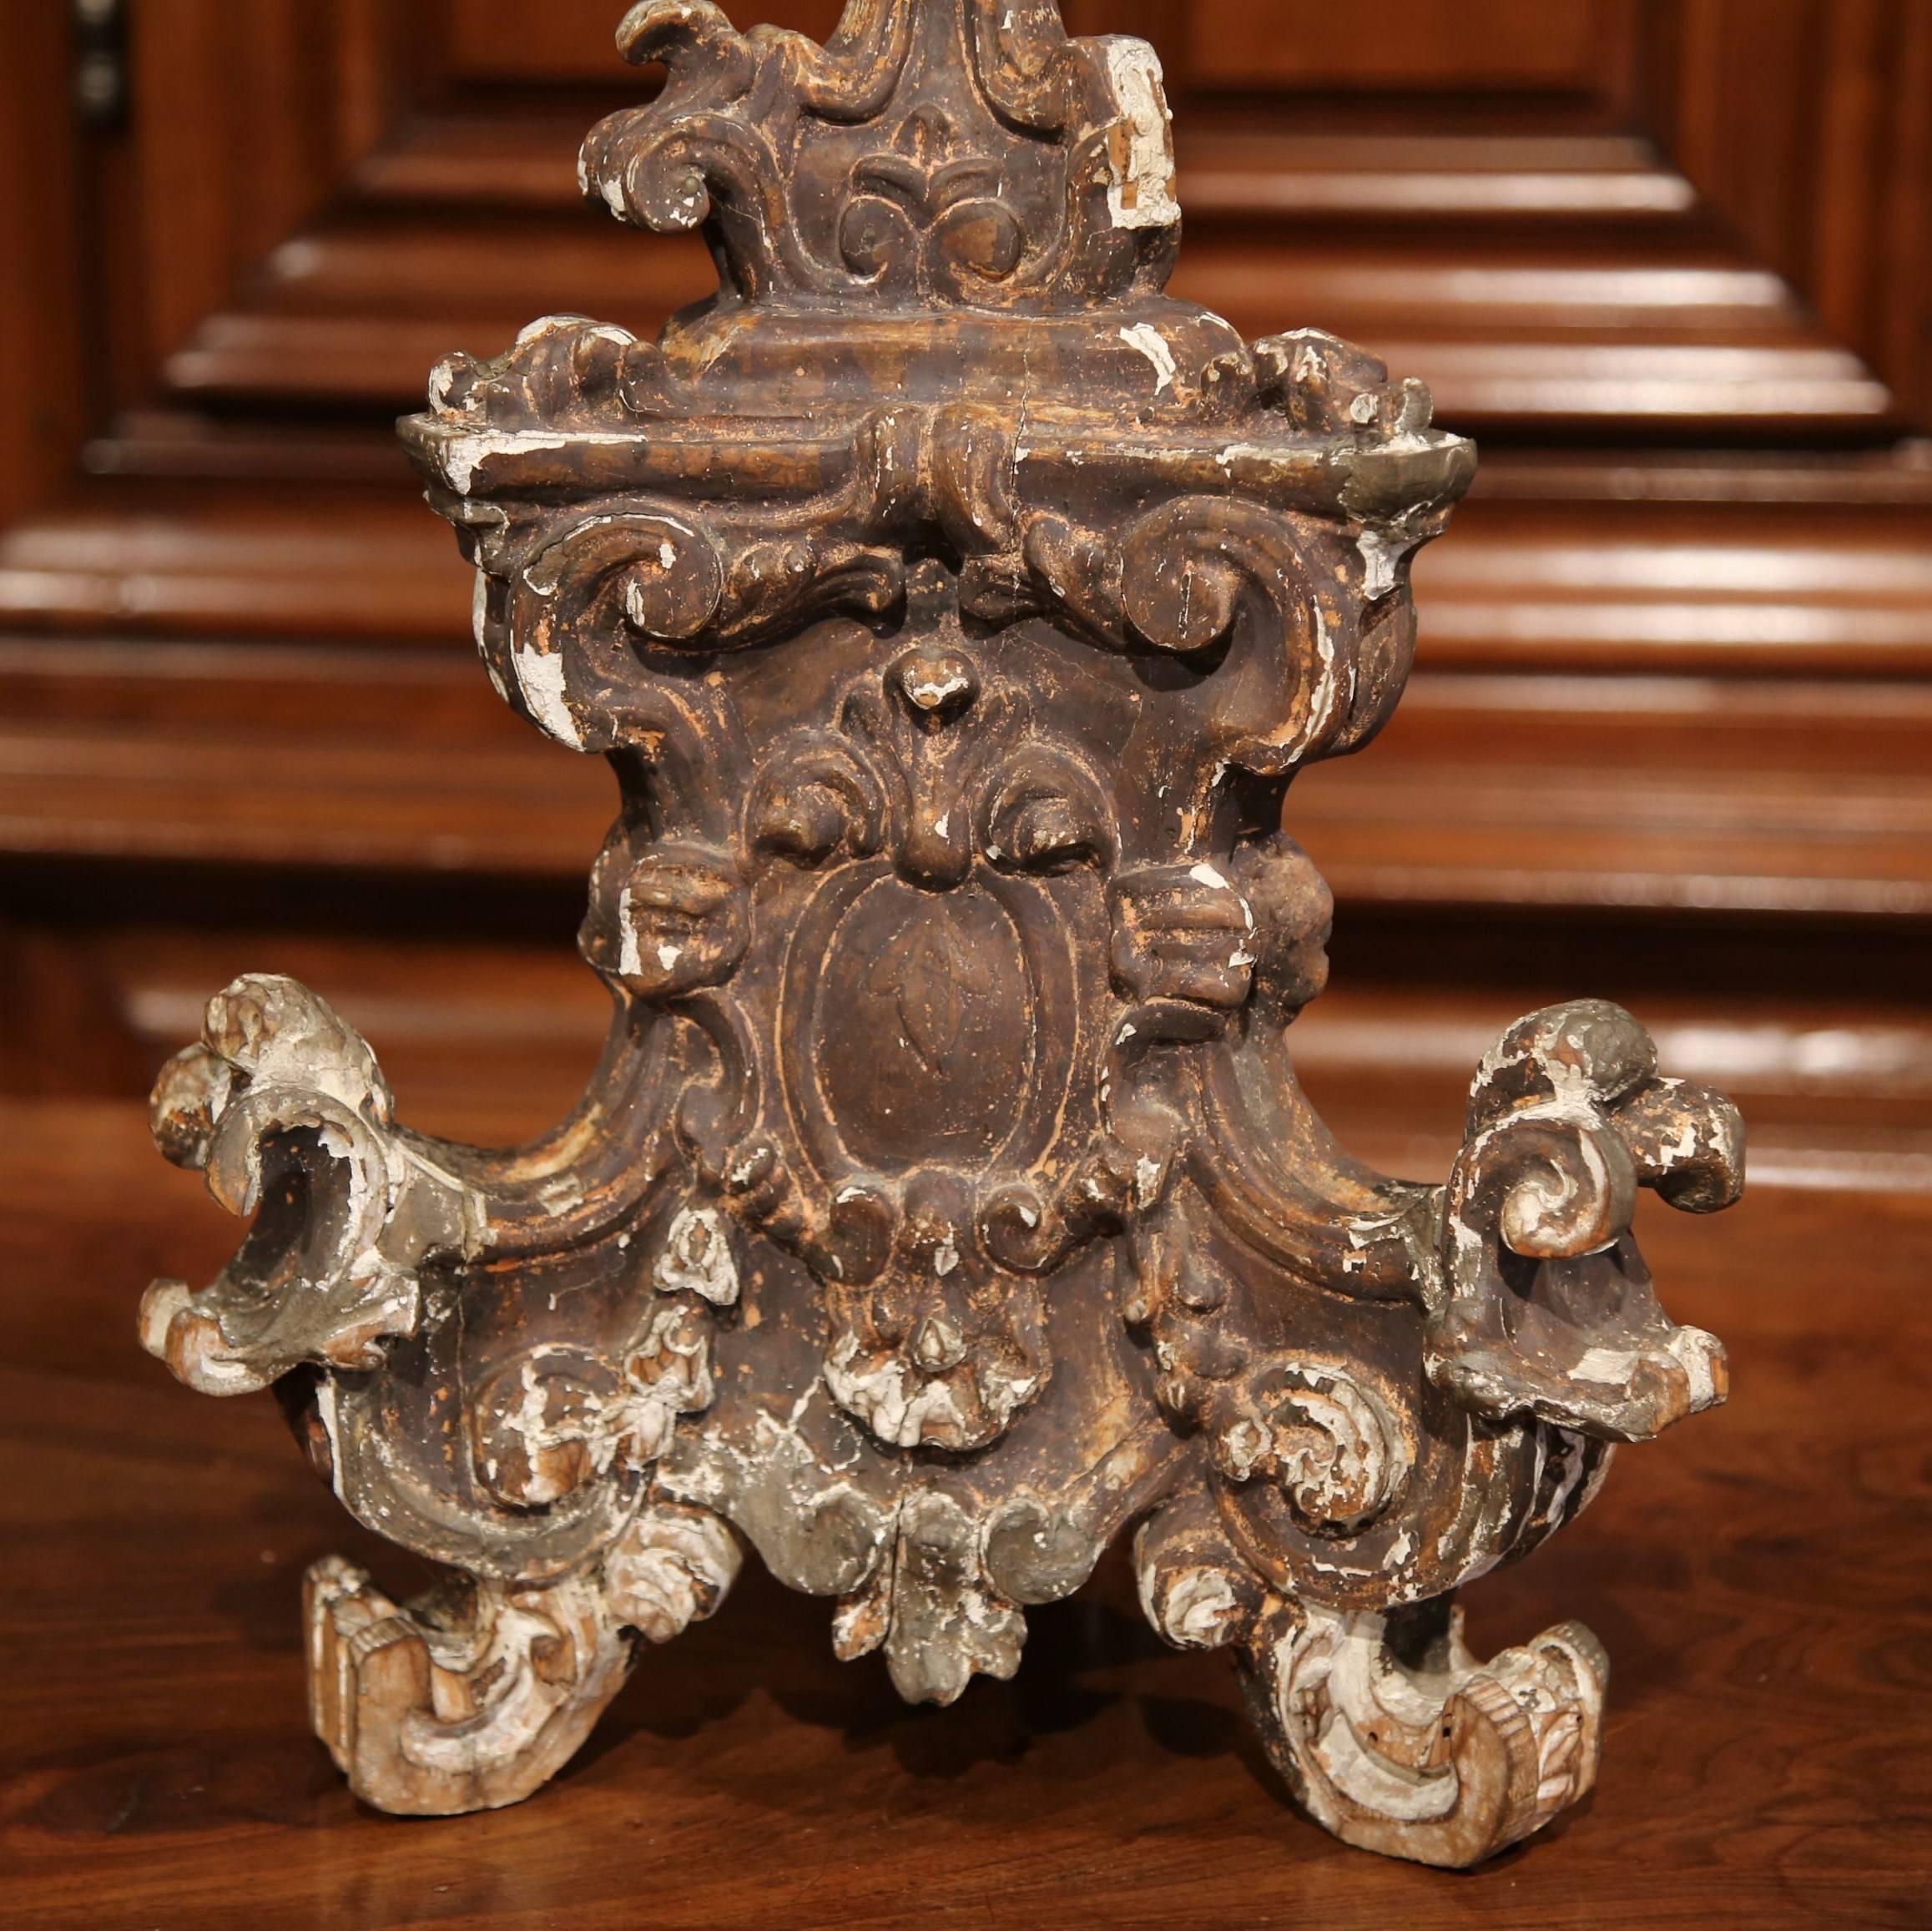 This large, antique candlestick was crafted in Italy, circa 1840. The ornate pricket is embellished with carved cherub faces and sits on three scrolled feet. The entire candlestick is decorated with its original gilt finish, but shows significant